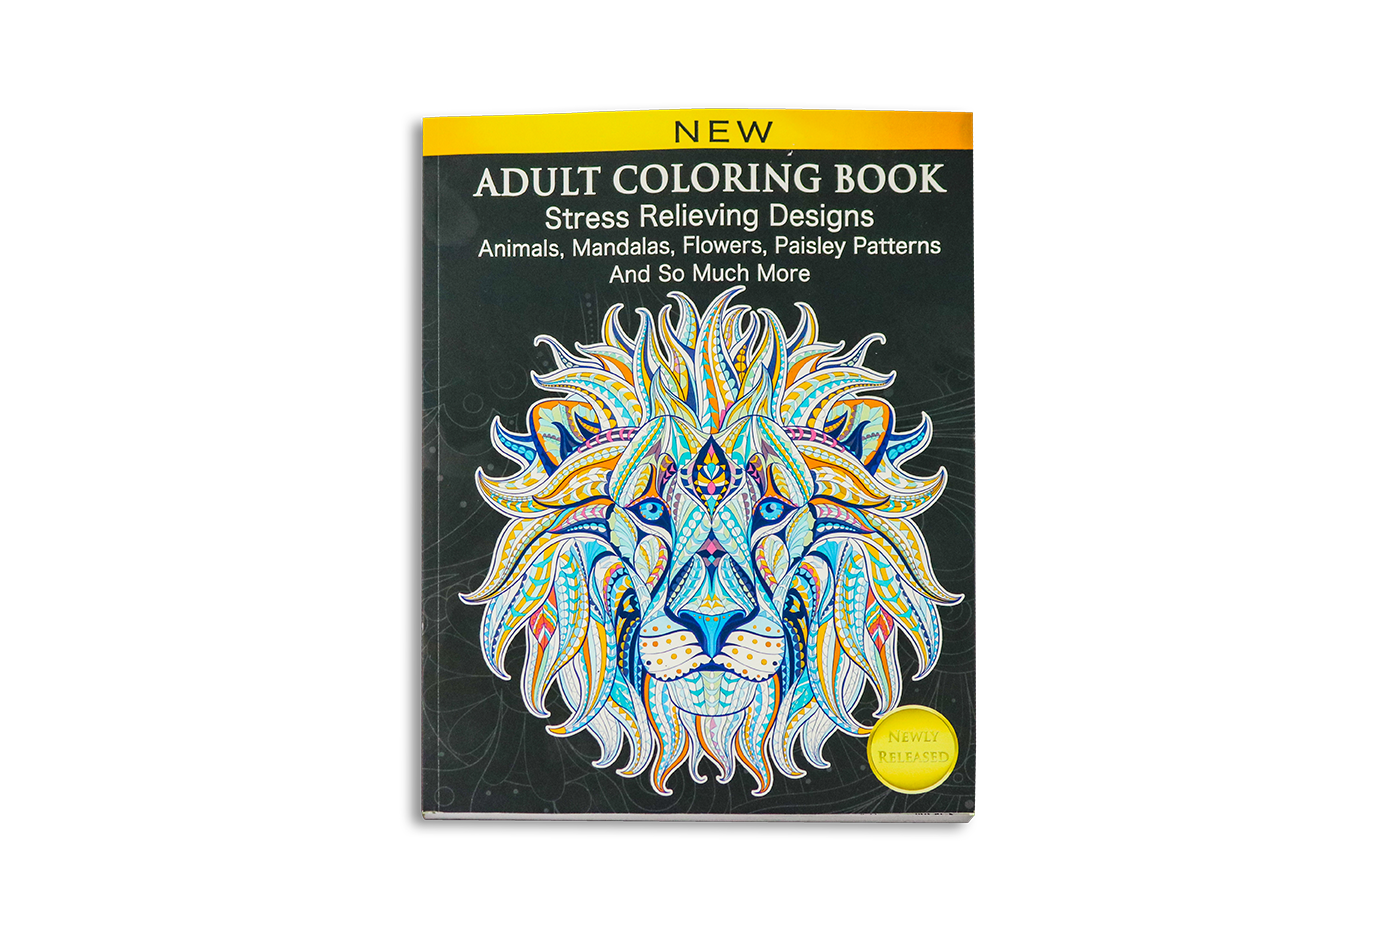 Adult coloring books are way better with markers #adultcoloringbook #c, Coloring Book